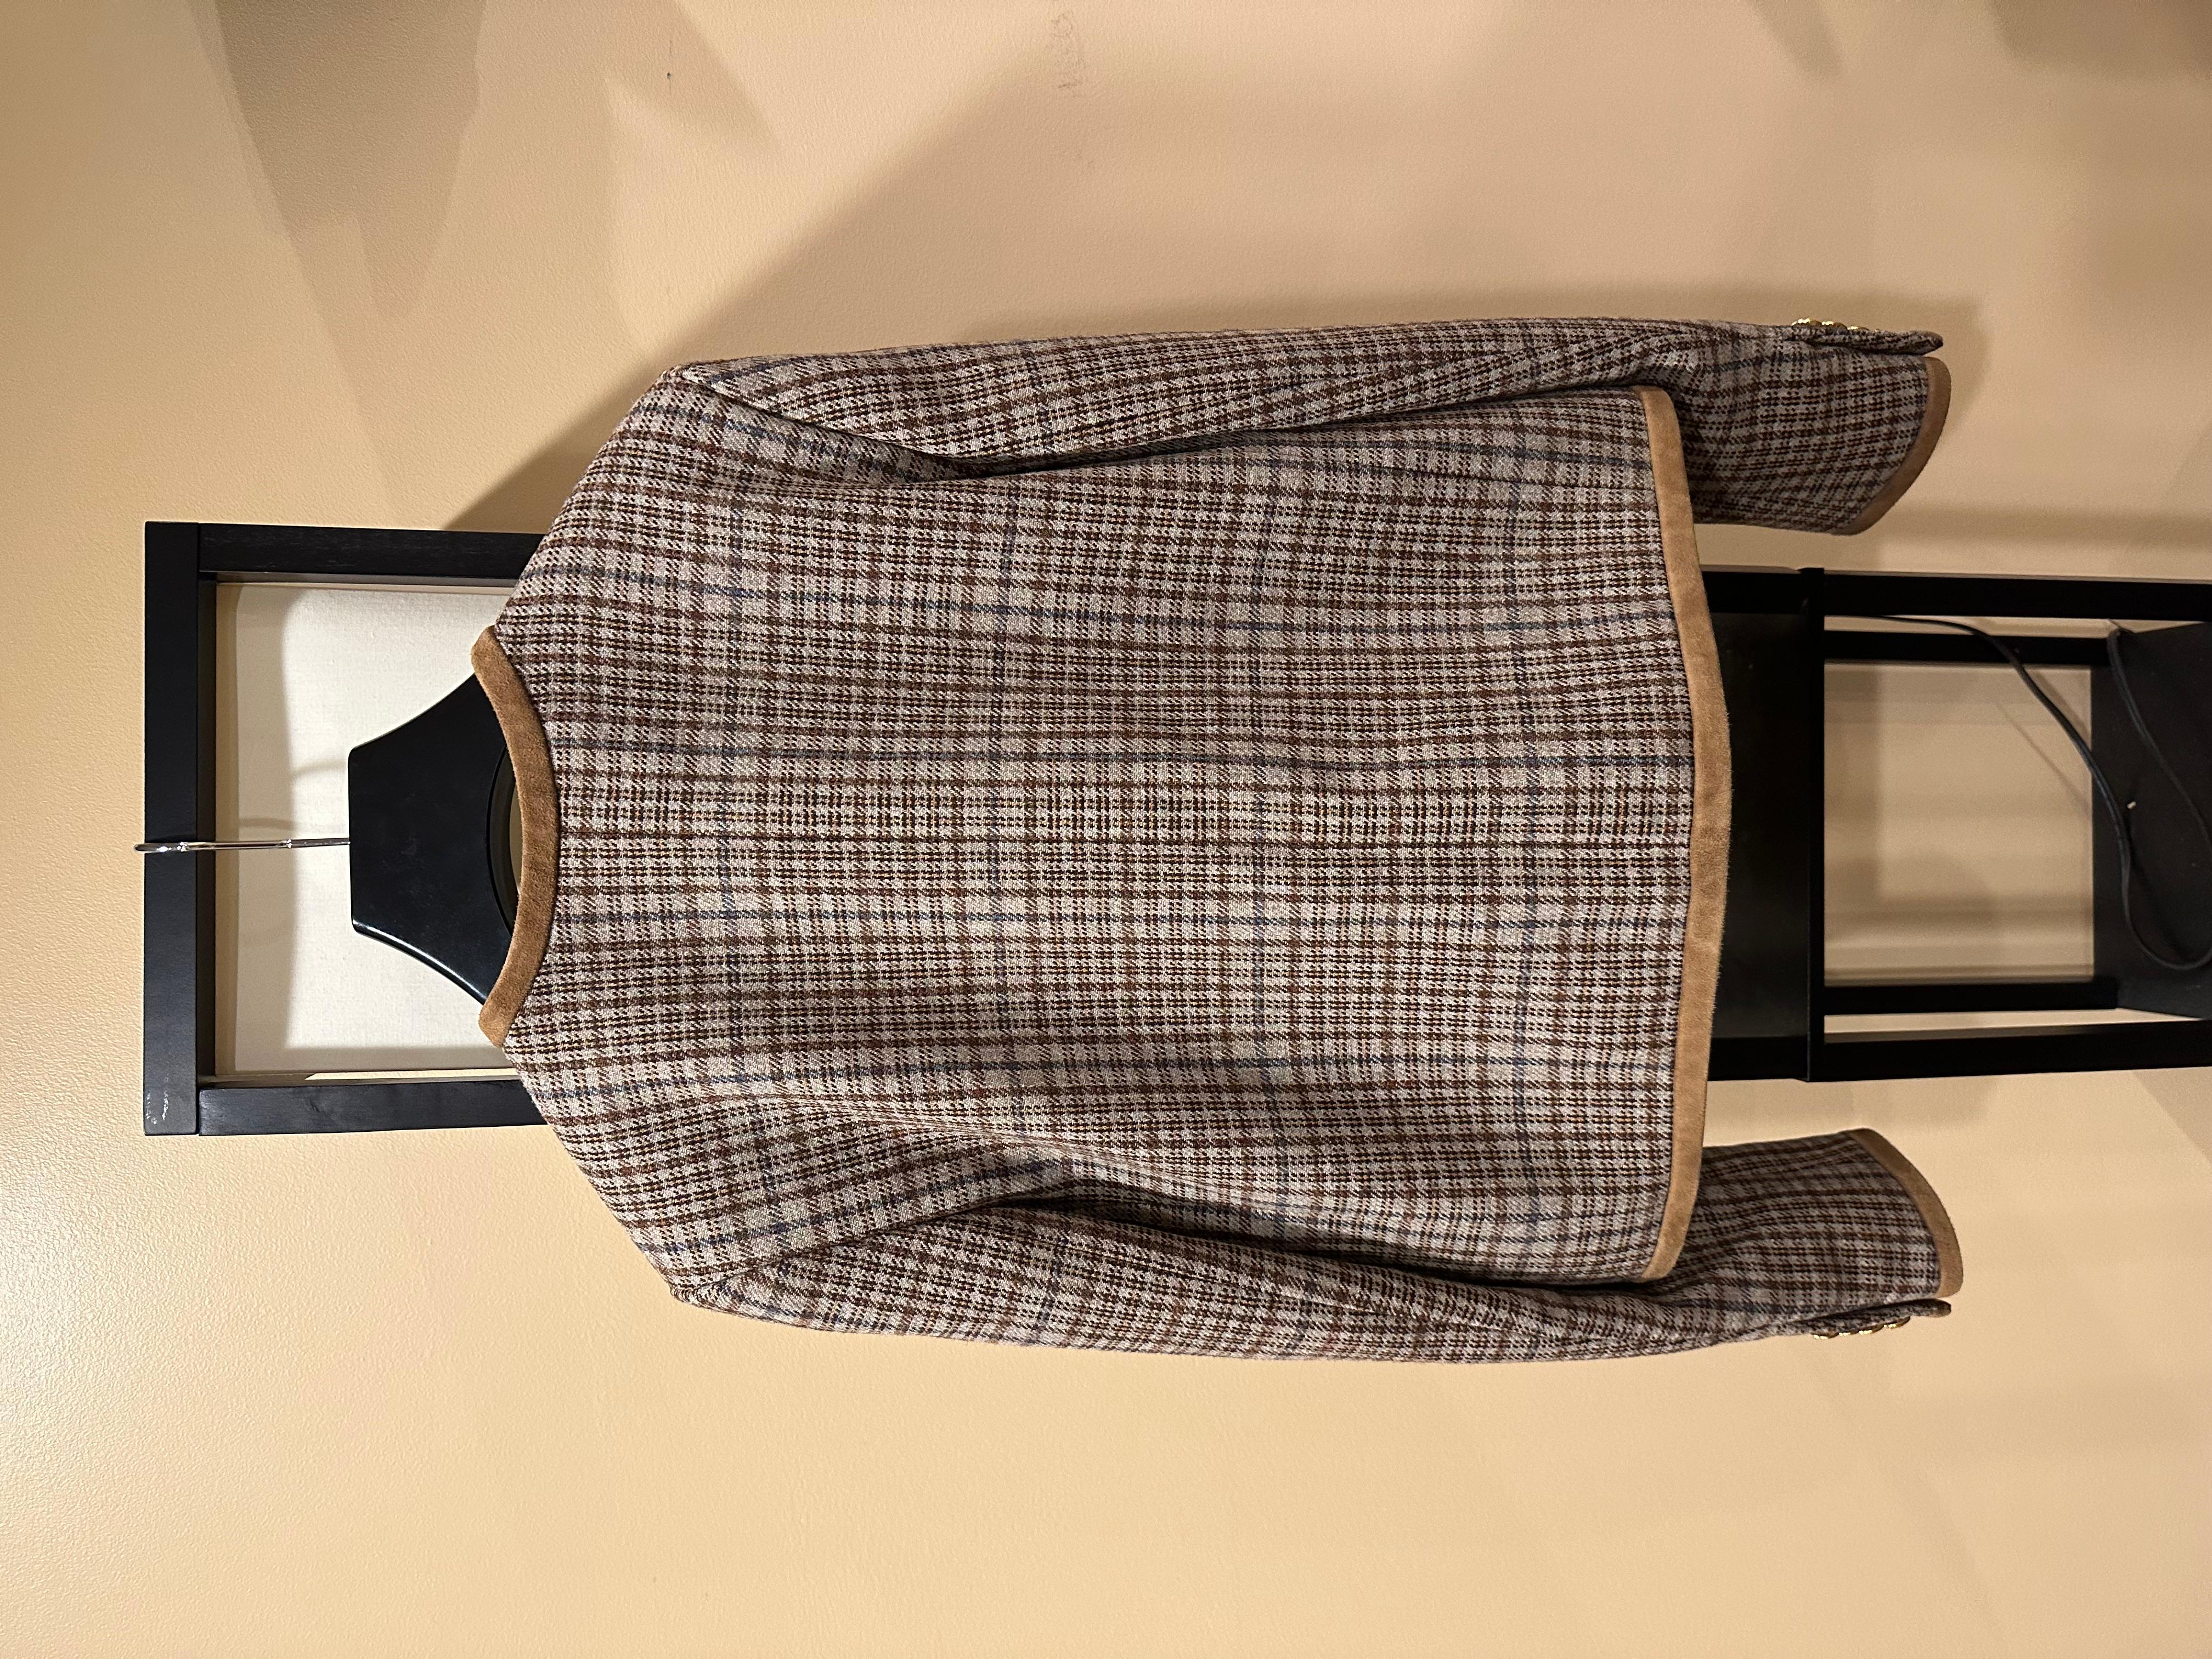 Celine x Hedi CHASSEUR Kaia Gerber Exclusive Checkered Tweed Jacket


Size 38
Brand new

Extremely rare Celine by Hedi Slimane Chasseur jacket made for Kaia Gerber.
Luxury wool finished with suede leather board and gold buttons.
Only one on the